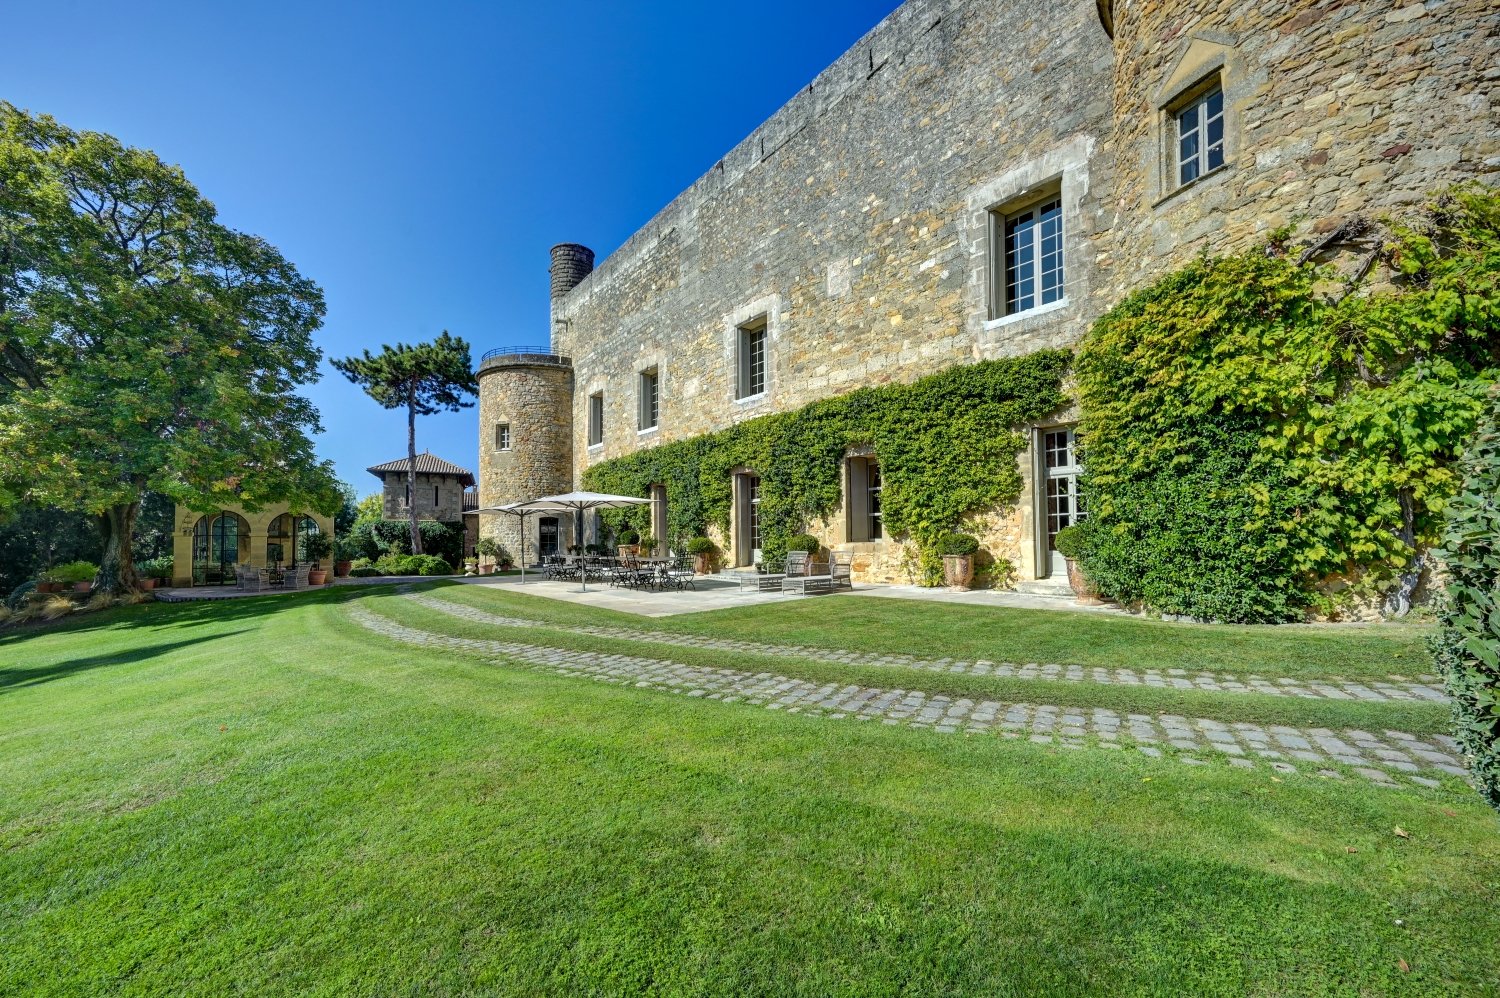 Castle to rent in Uzes in the Var for your vacations and seminars